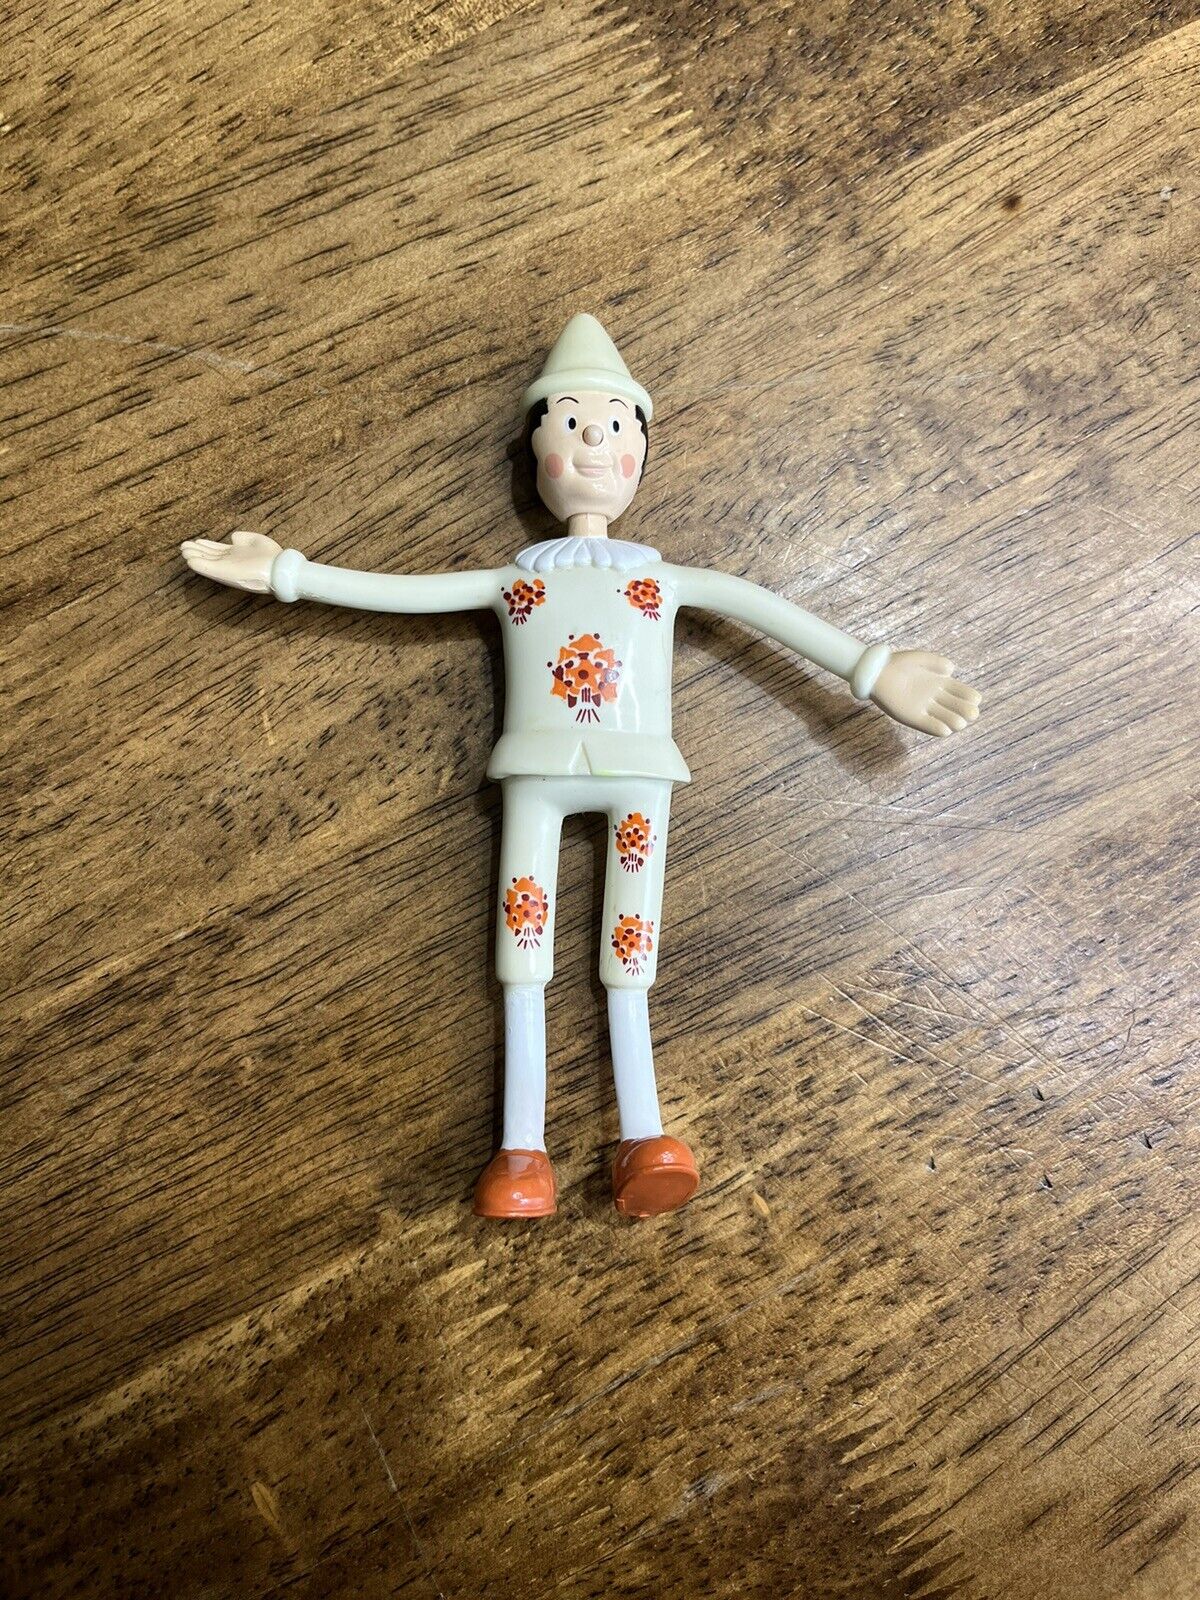 VINTAGE 2002 “PINOCCHIO” TOY / GROWING NOSE BY MIRAMAX FILMS